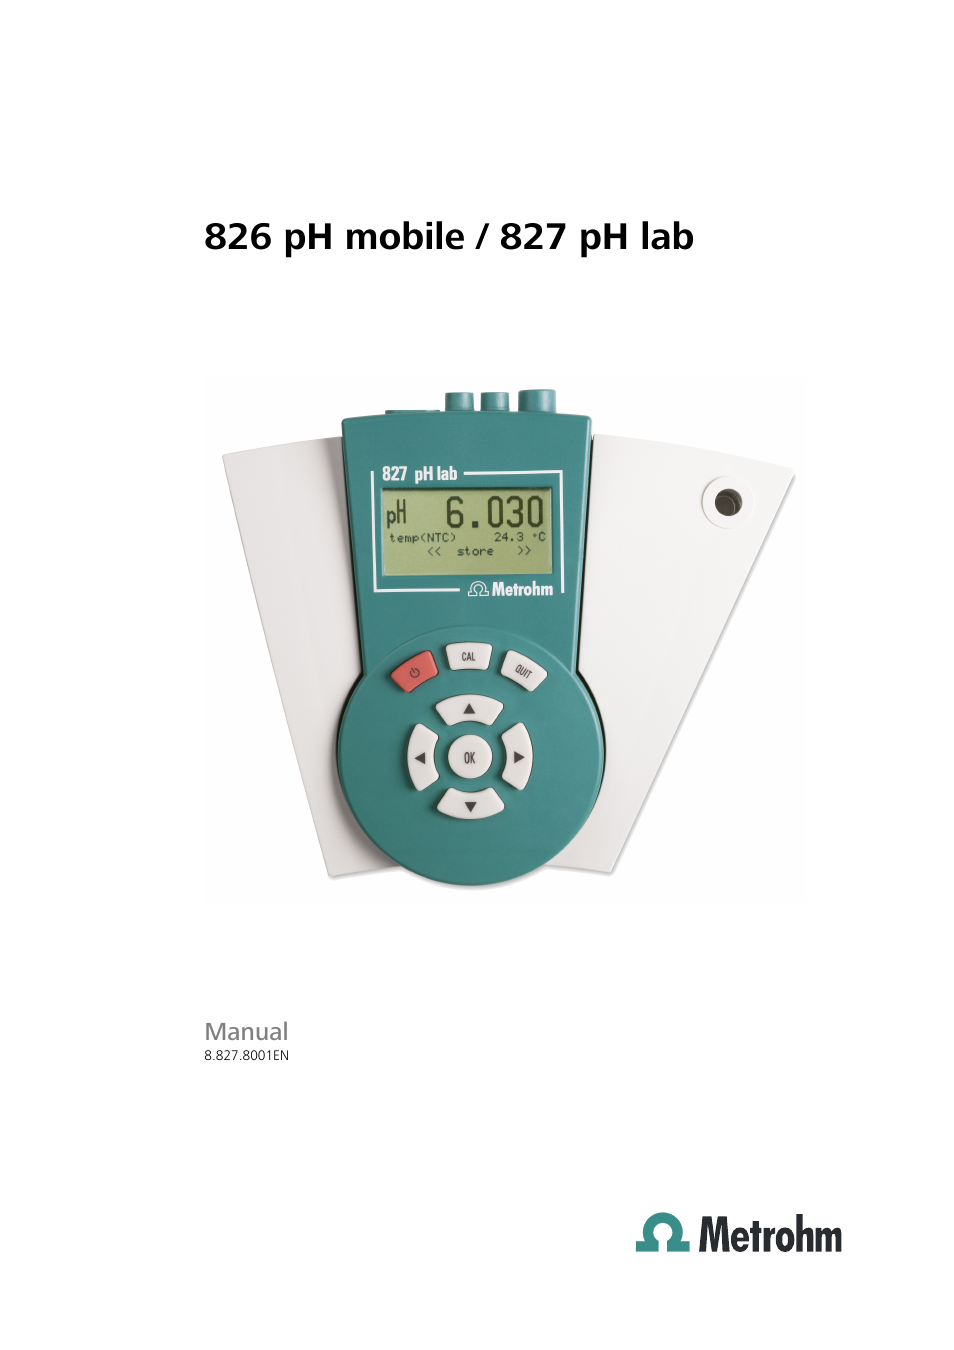 Metrohm 827 pH lab User Manual | 82 pages | Also for: 826 pH mobile